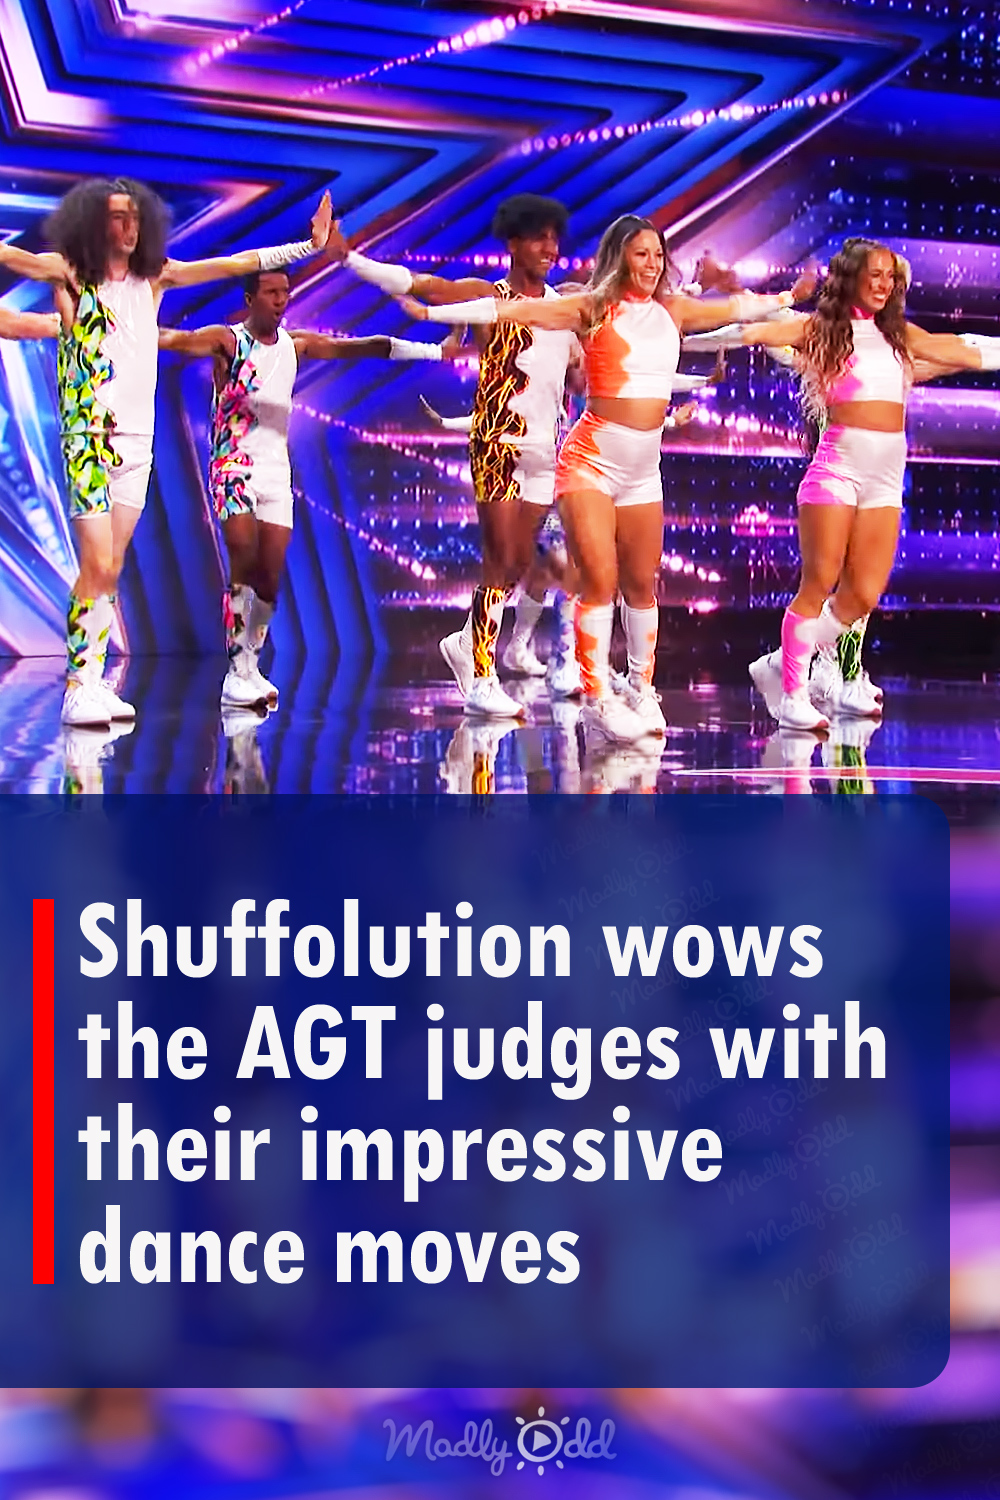 Shuffolution wows the AGT judges with their impressive dance moves